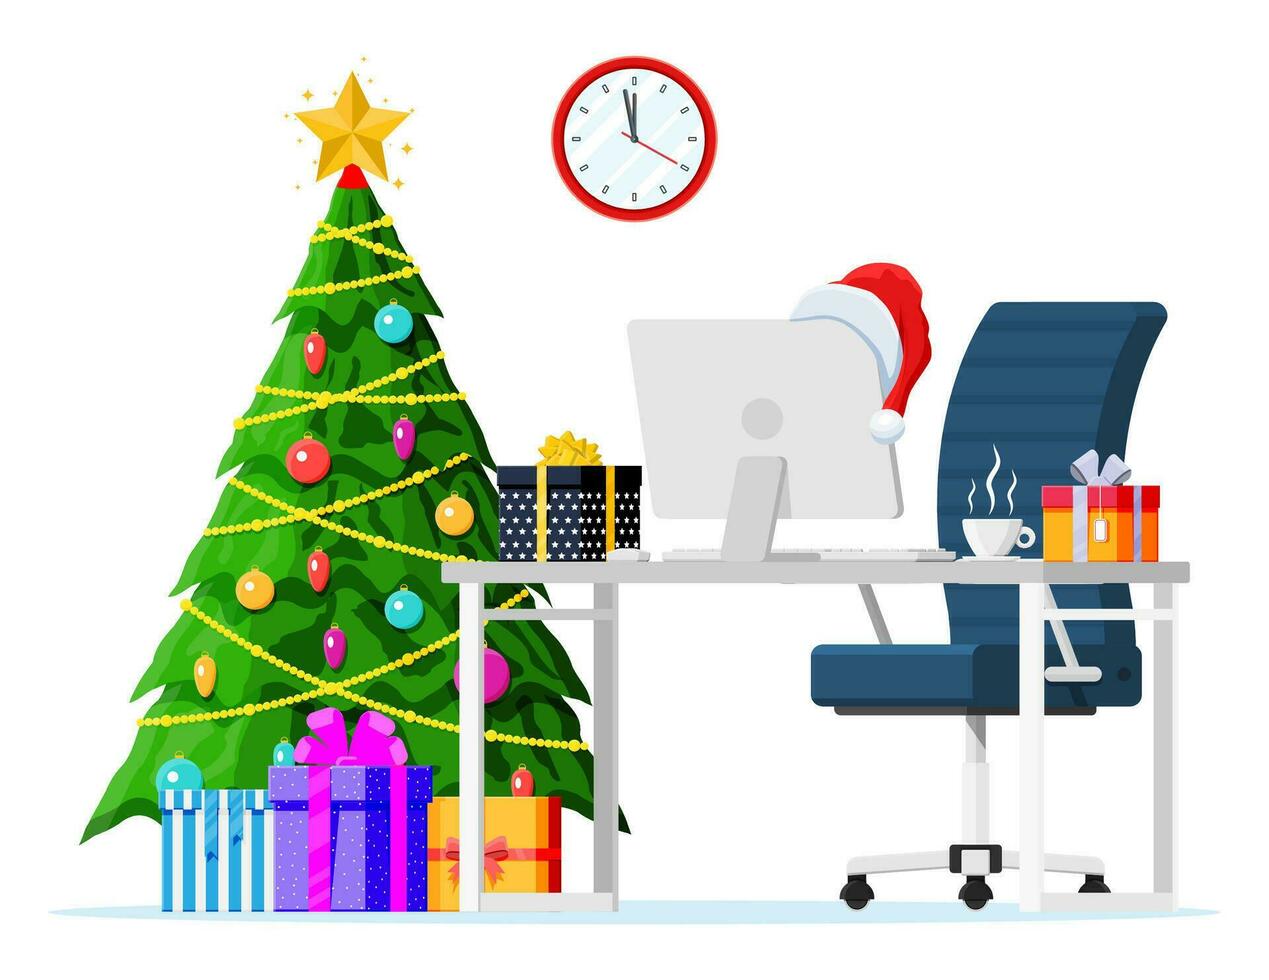 Christmas and New Year Office Desk Workspace Interior. Gift Box, Christmas Tree, Chair, Computer PC, Clocks. New Year Decoration. Merry Christmas Holiday Xmas Celebration. Vector illustration